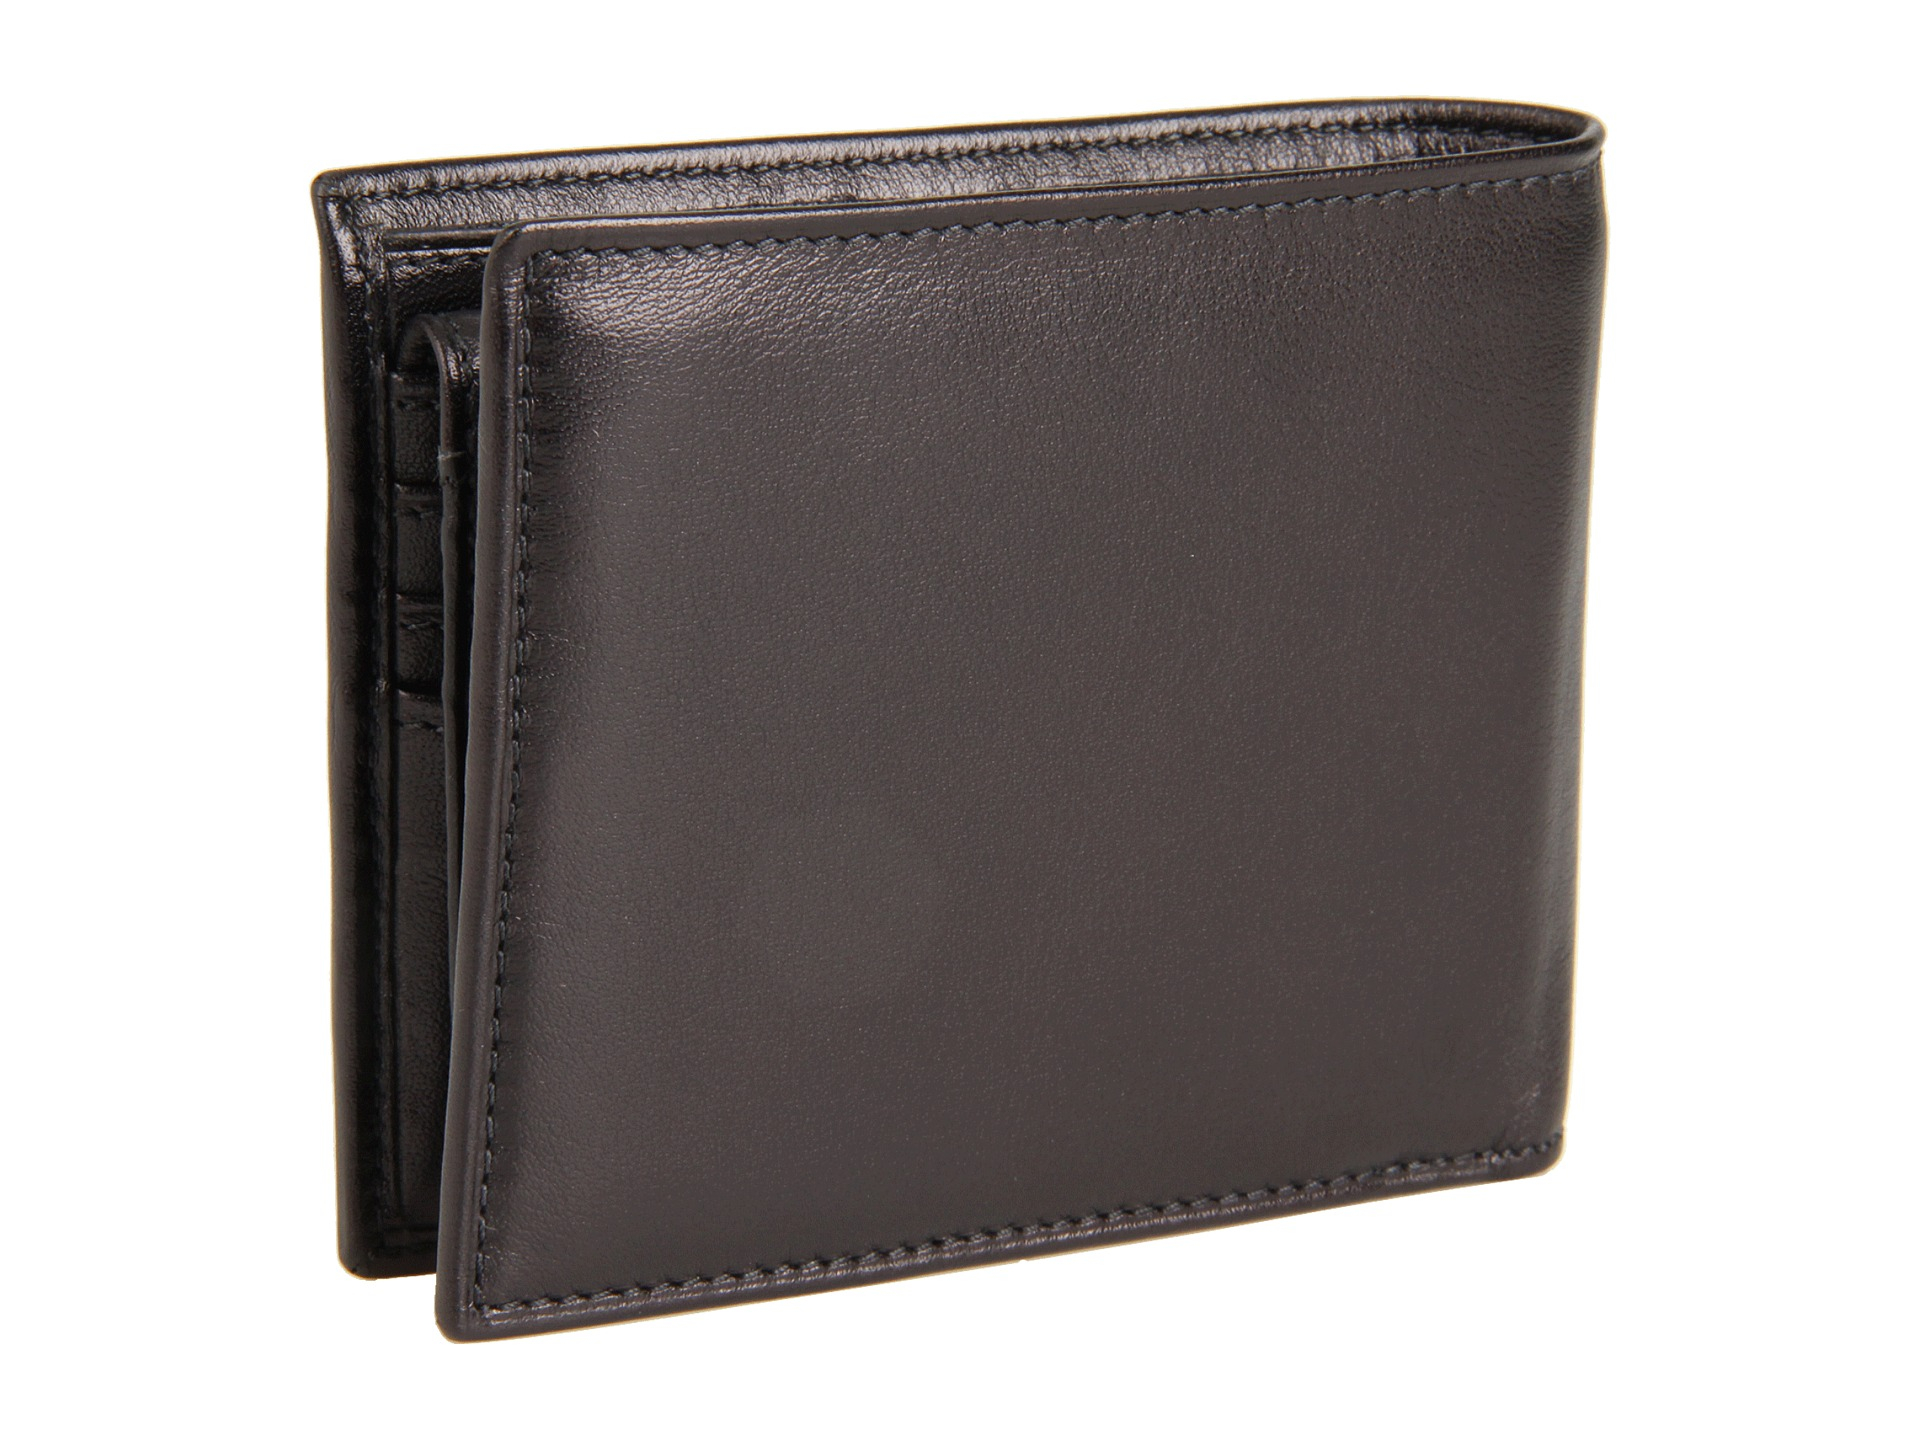 Tumi Delta Global Removable Passcase Wallet in Black for Men - Lyst